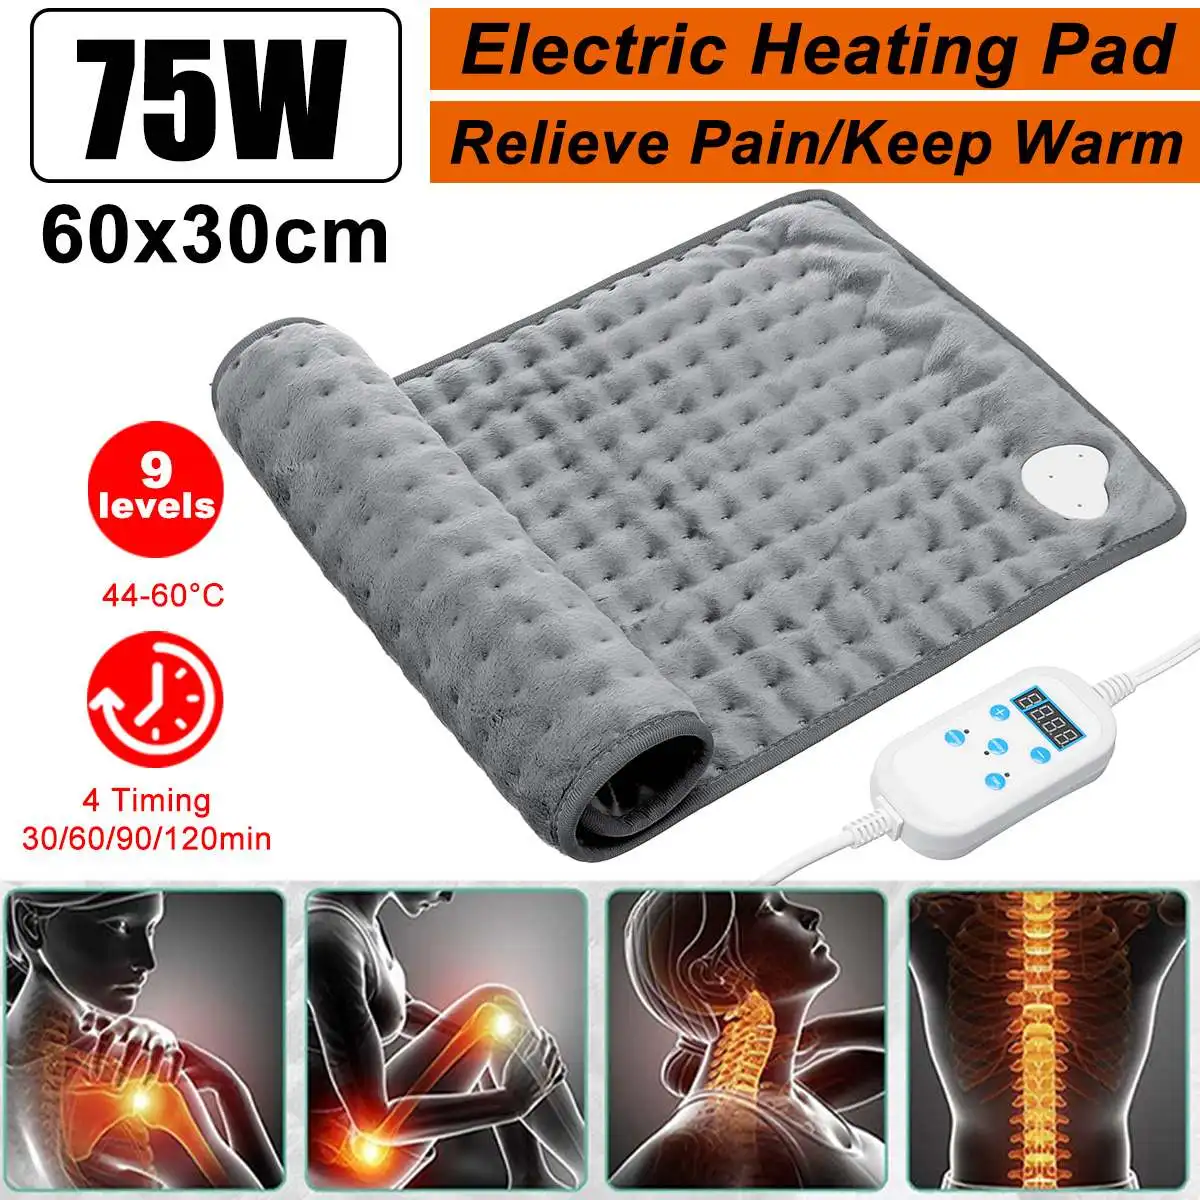 

75W Electric Warmer Heating Pad Timer for Shoulder Neck Back Spine Leg Pain Relief Winter Warmer Wrap Temp Heater Pad 60x30cm